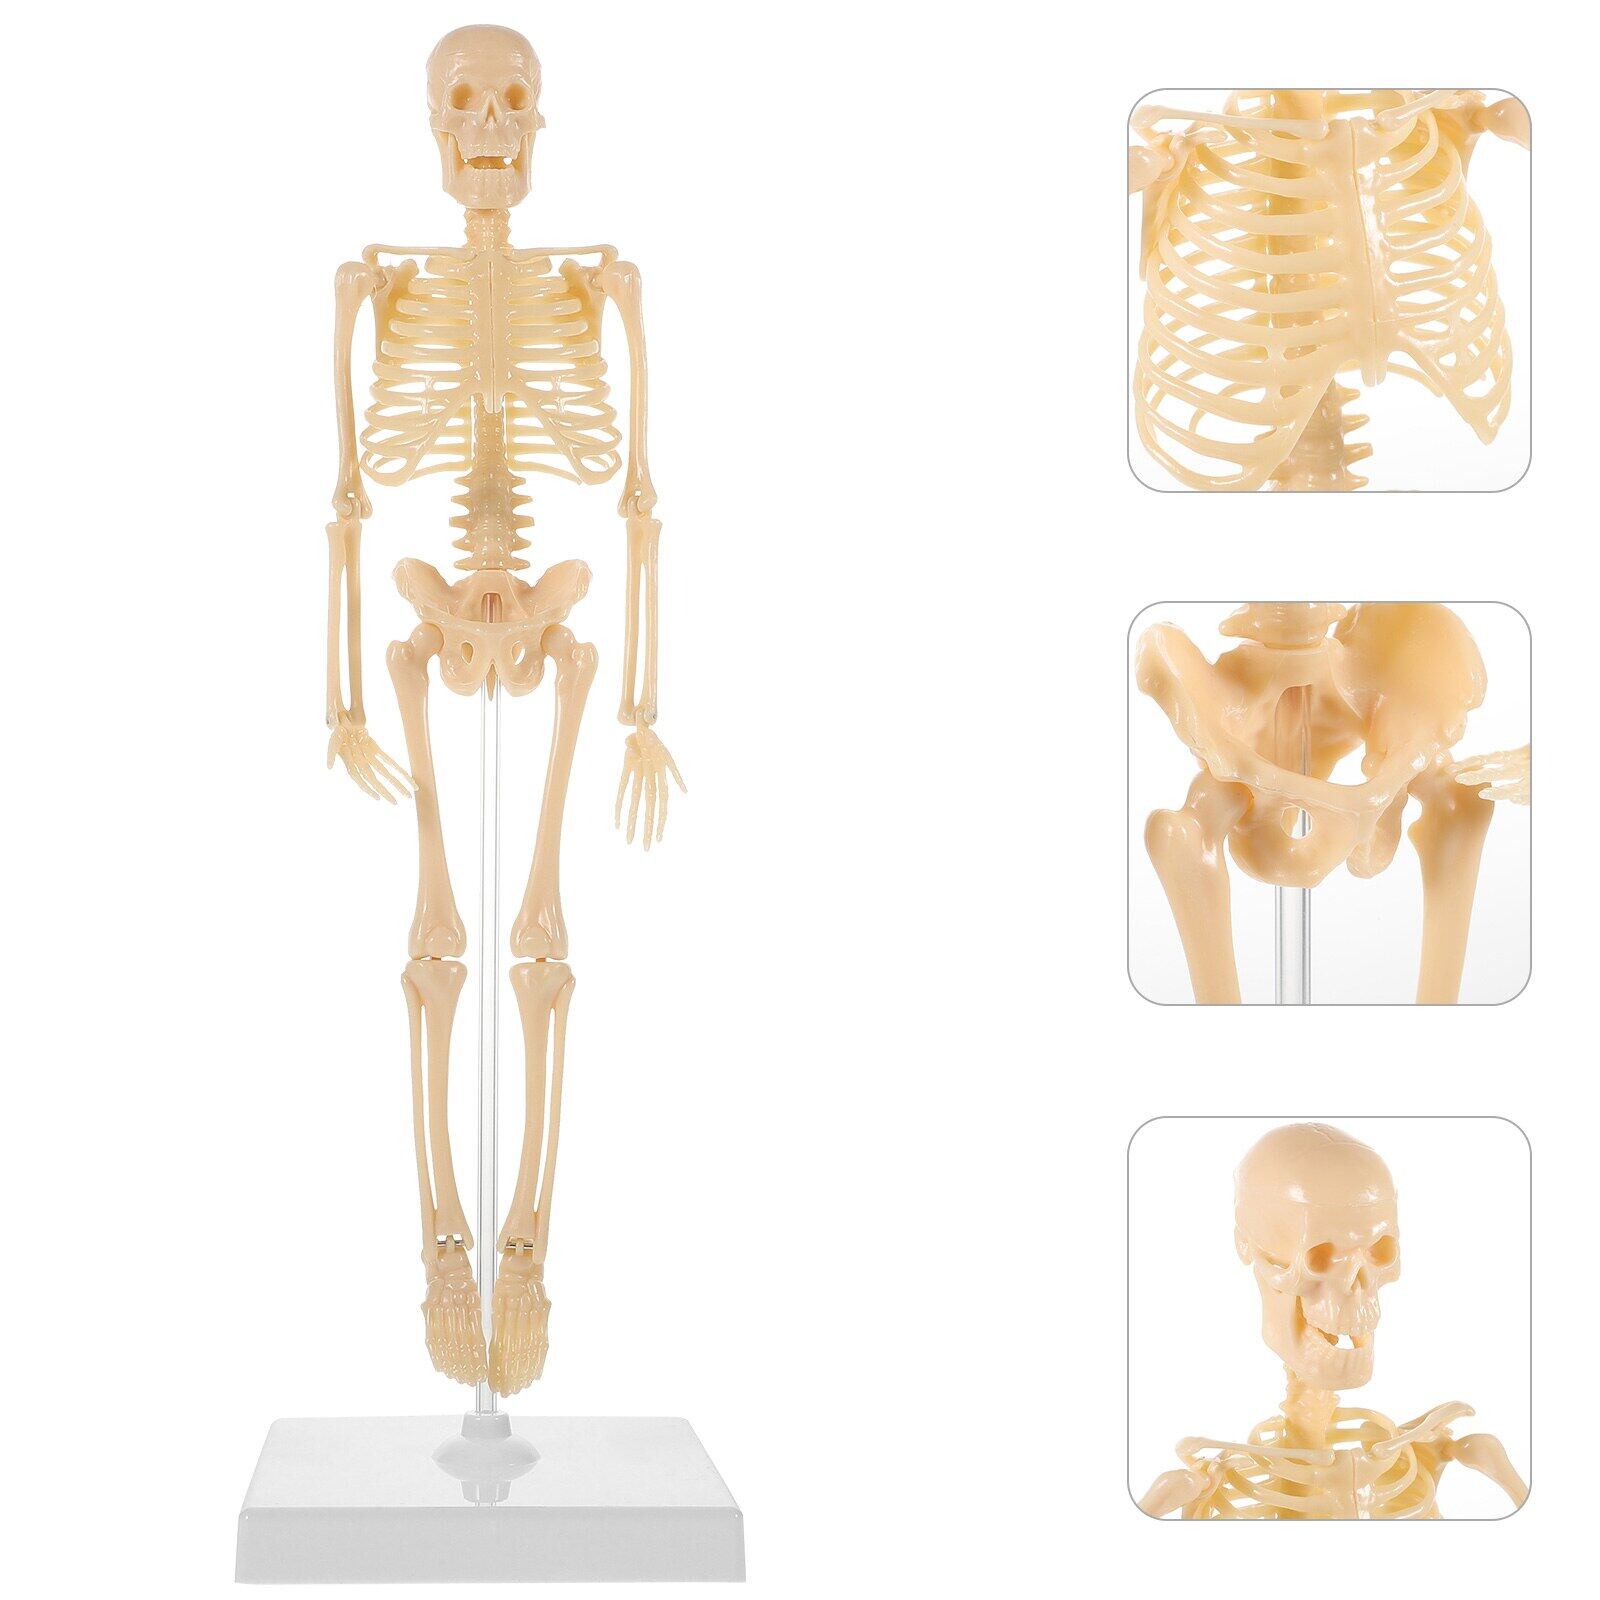 Toys For Kids Human Model Human Anatomical Anatomy Model With Stand